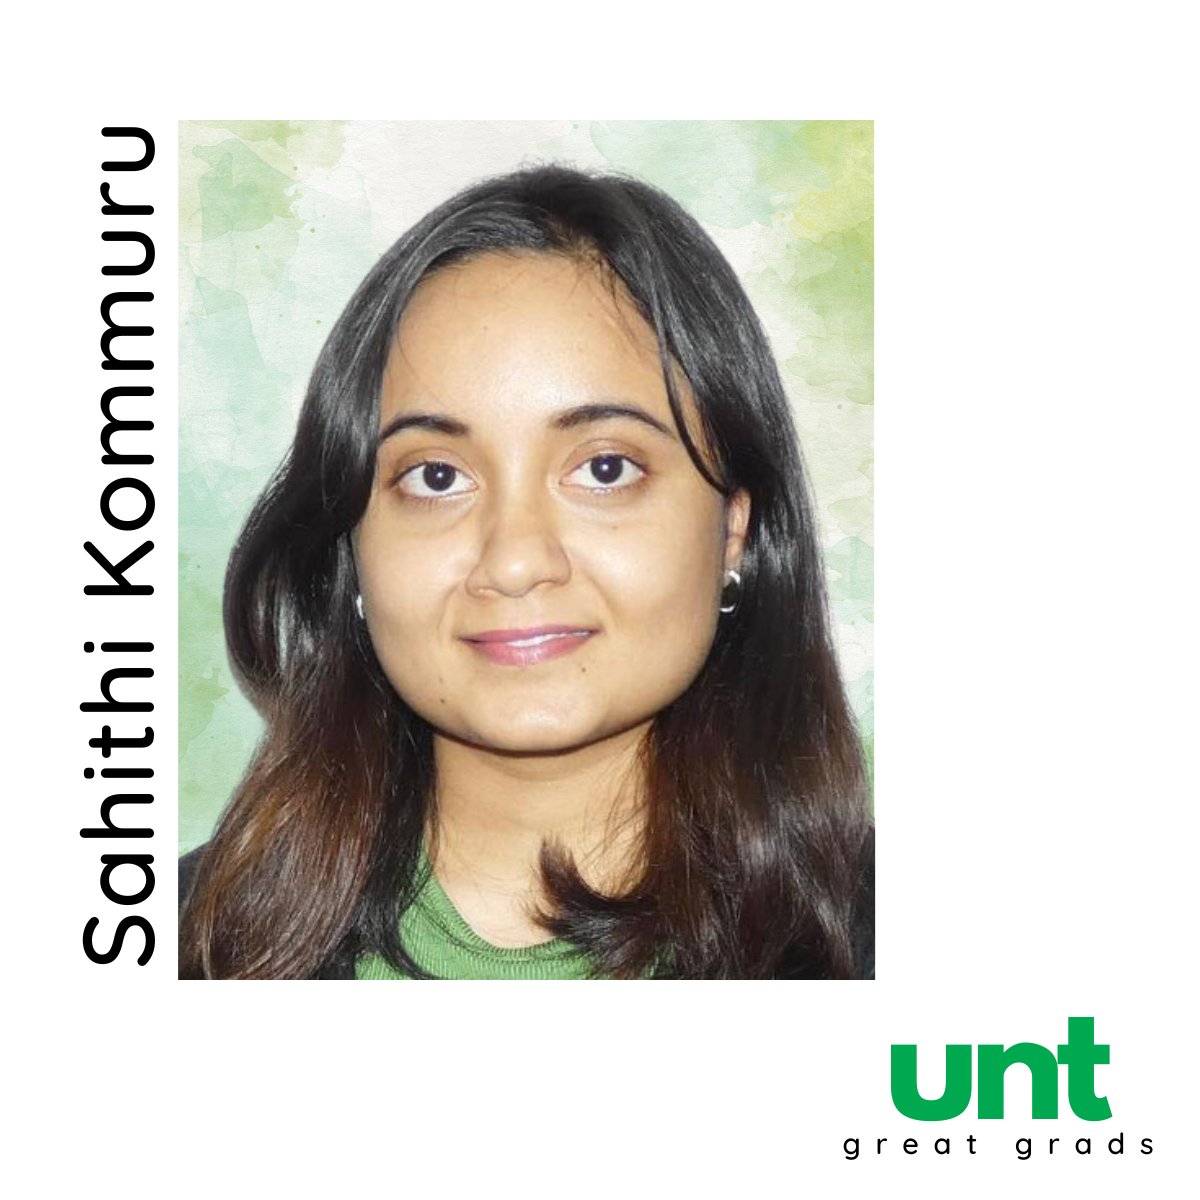 'I decided on Health Informatics because I've always appreciated how doctors and health care specialists dedicate their lives to serve patients and others in need,' #UNTGreatGrad Sahithi Kommuru says. ci.unt.edu/great-grads

#UNTCOI #UNTINFOSCIENCE #UNT #UNT23 #HealthInformatics